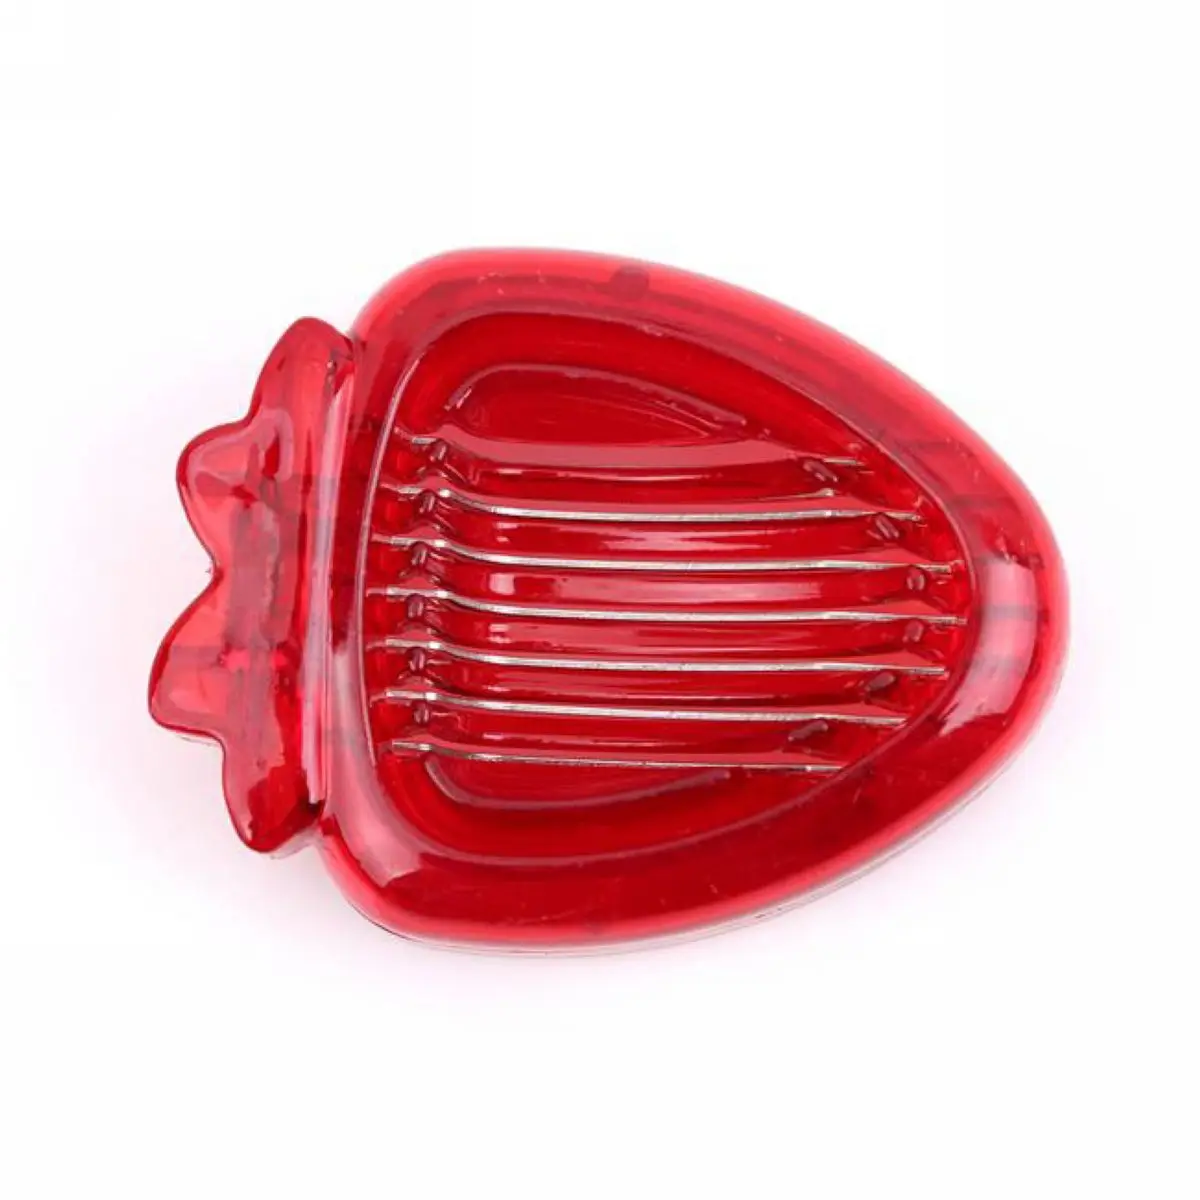 Strawberry Slicer Cutter Gadgets Home Kitchen Tool Stainless Steel & Plastic New kitchen tools